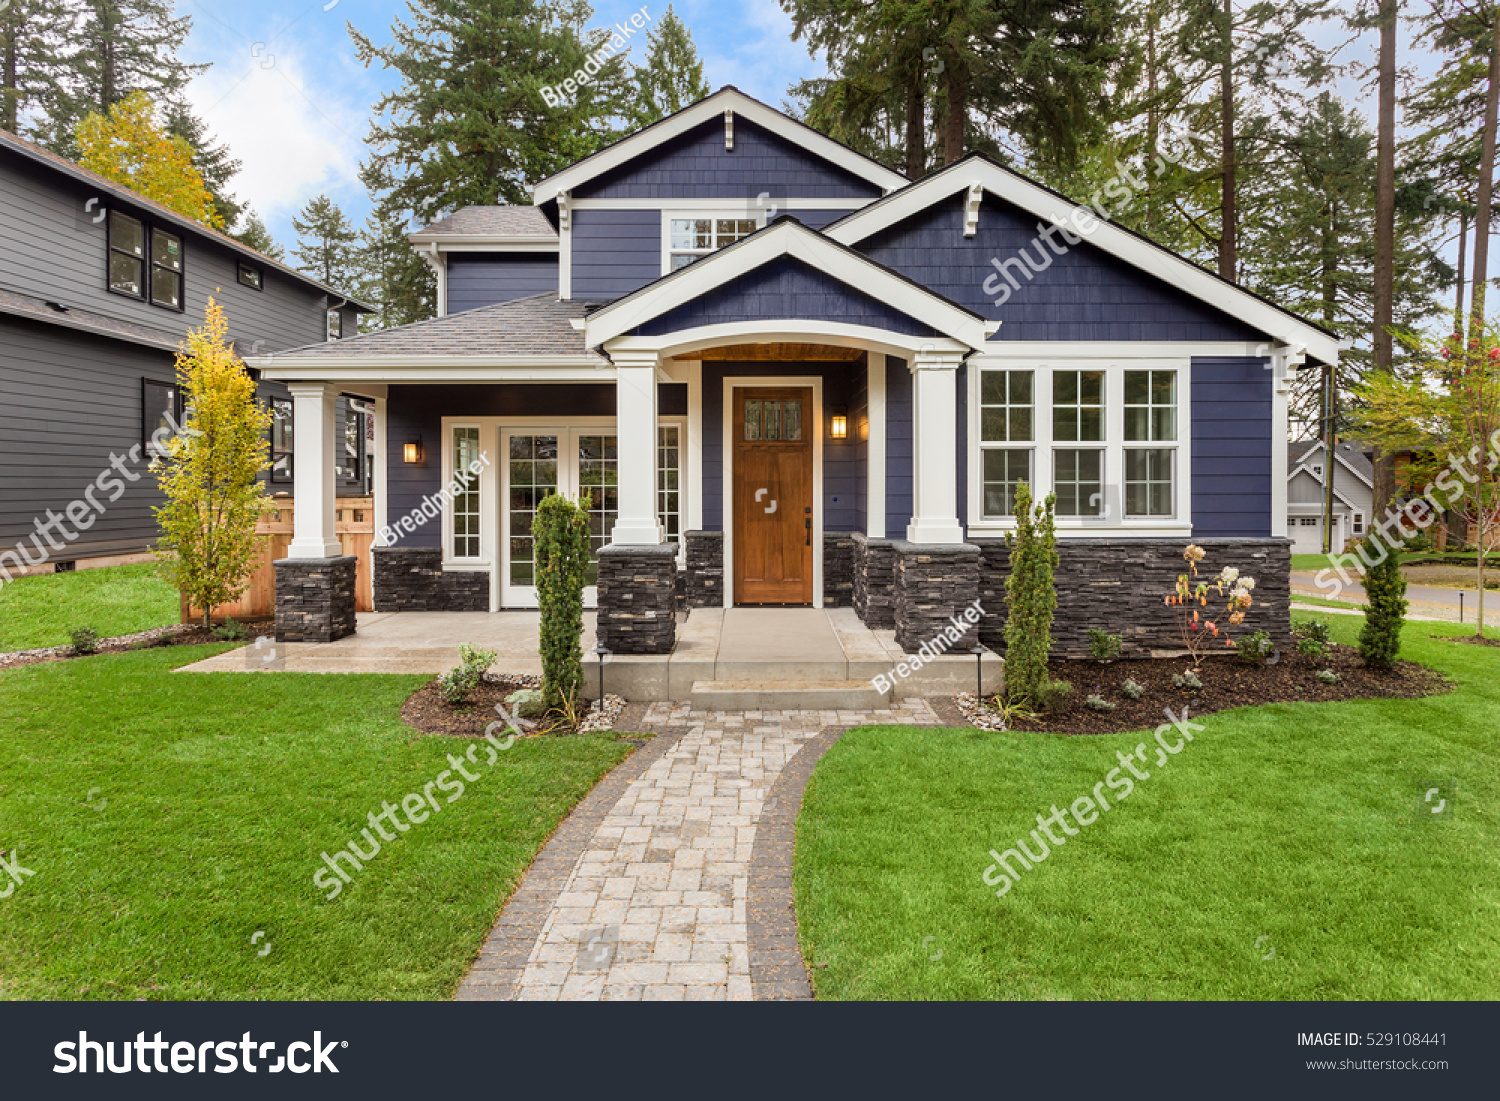 Beautiful exterior of newly built luxury home. Yard with green grass and walkway lead to ornately designed covered porch and front entrance.  #529108441